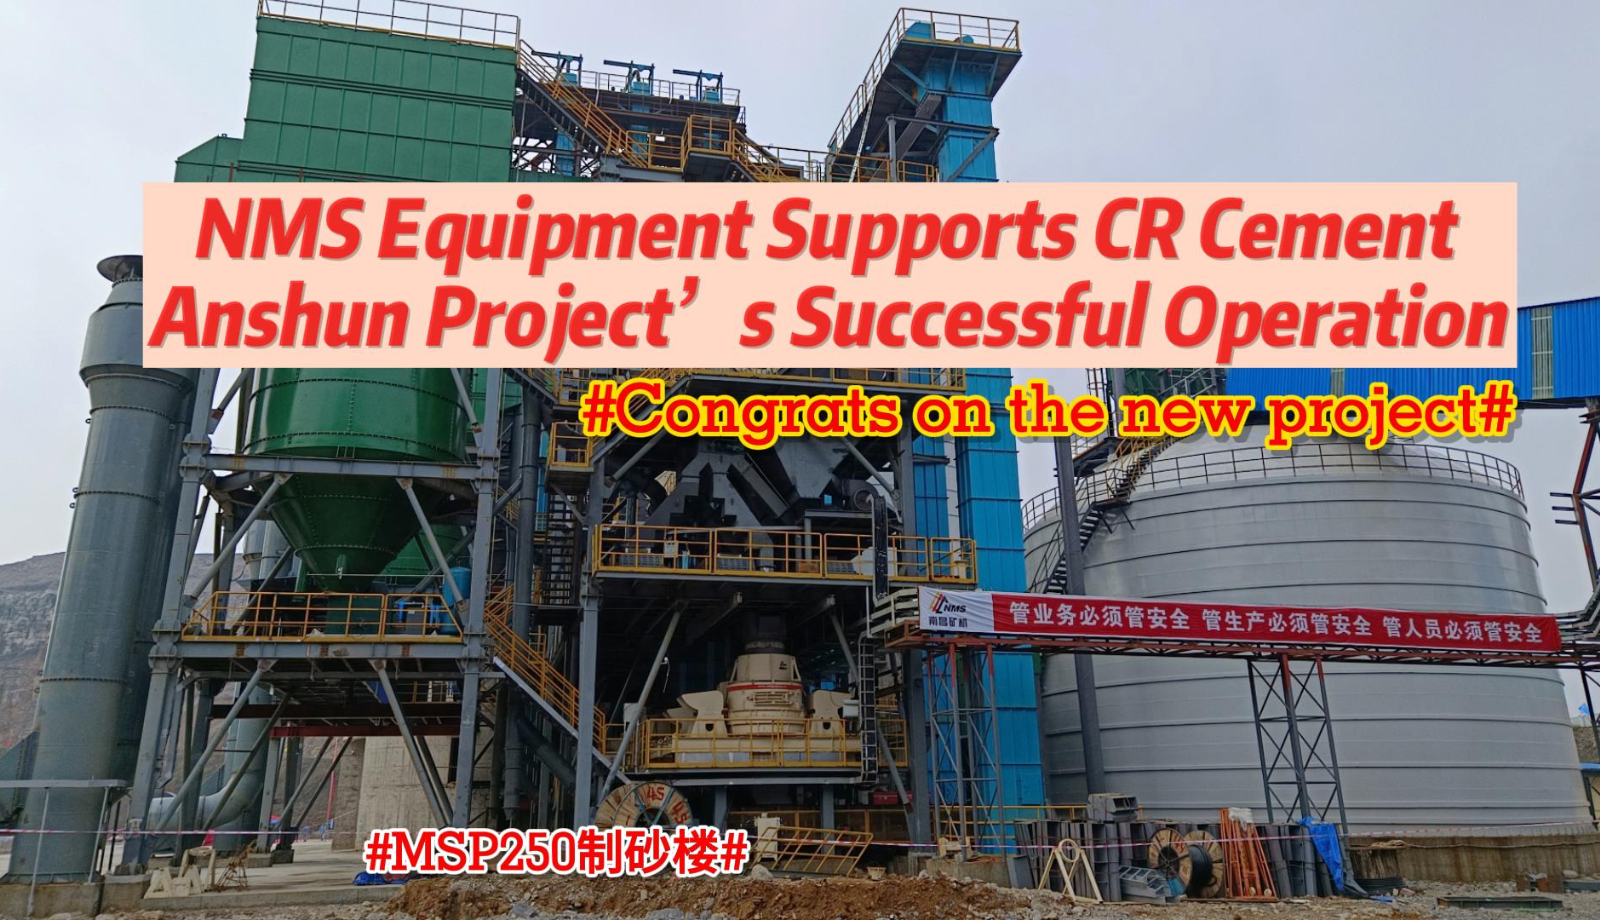 NMS Equipment Support CR Cement Anshun Project‘s Successful Operation